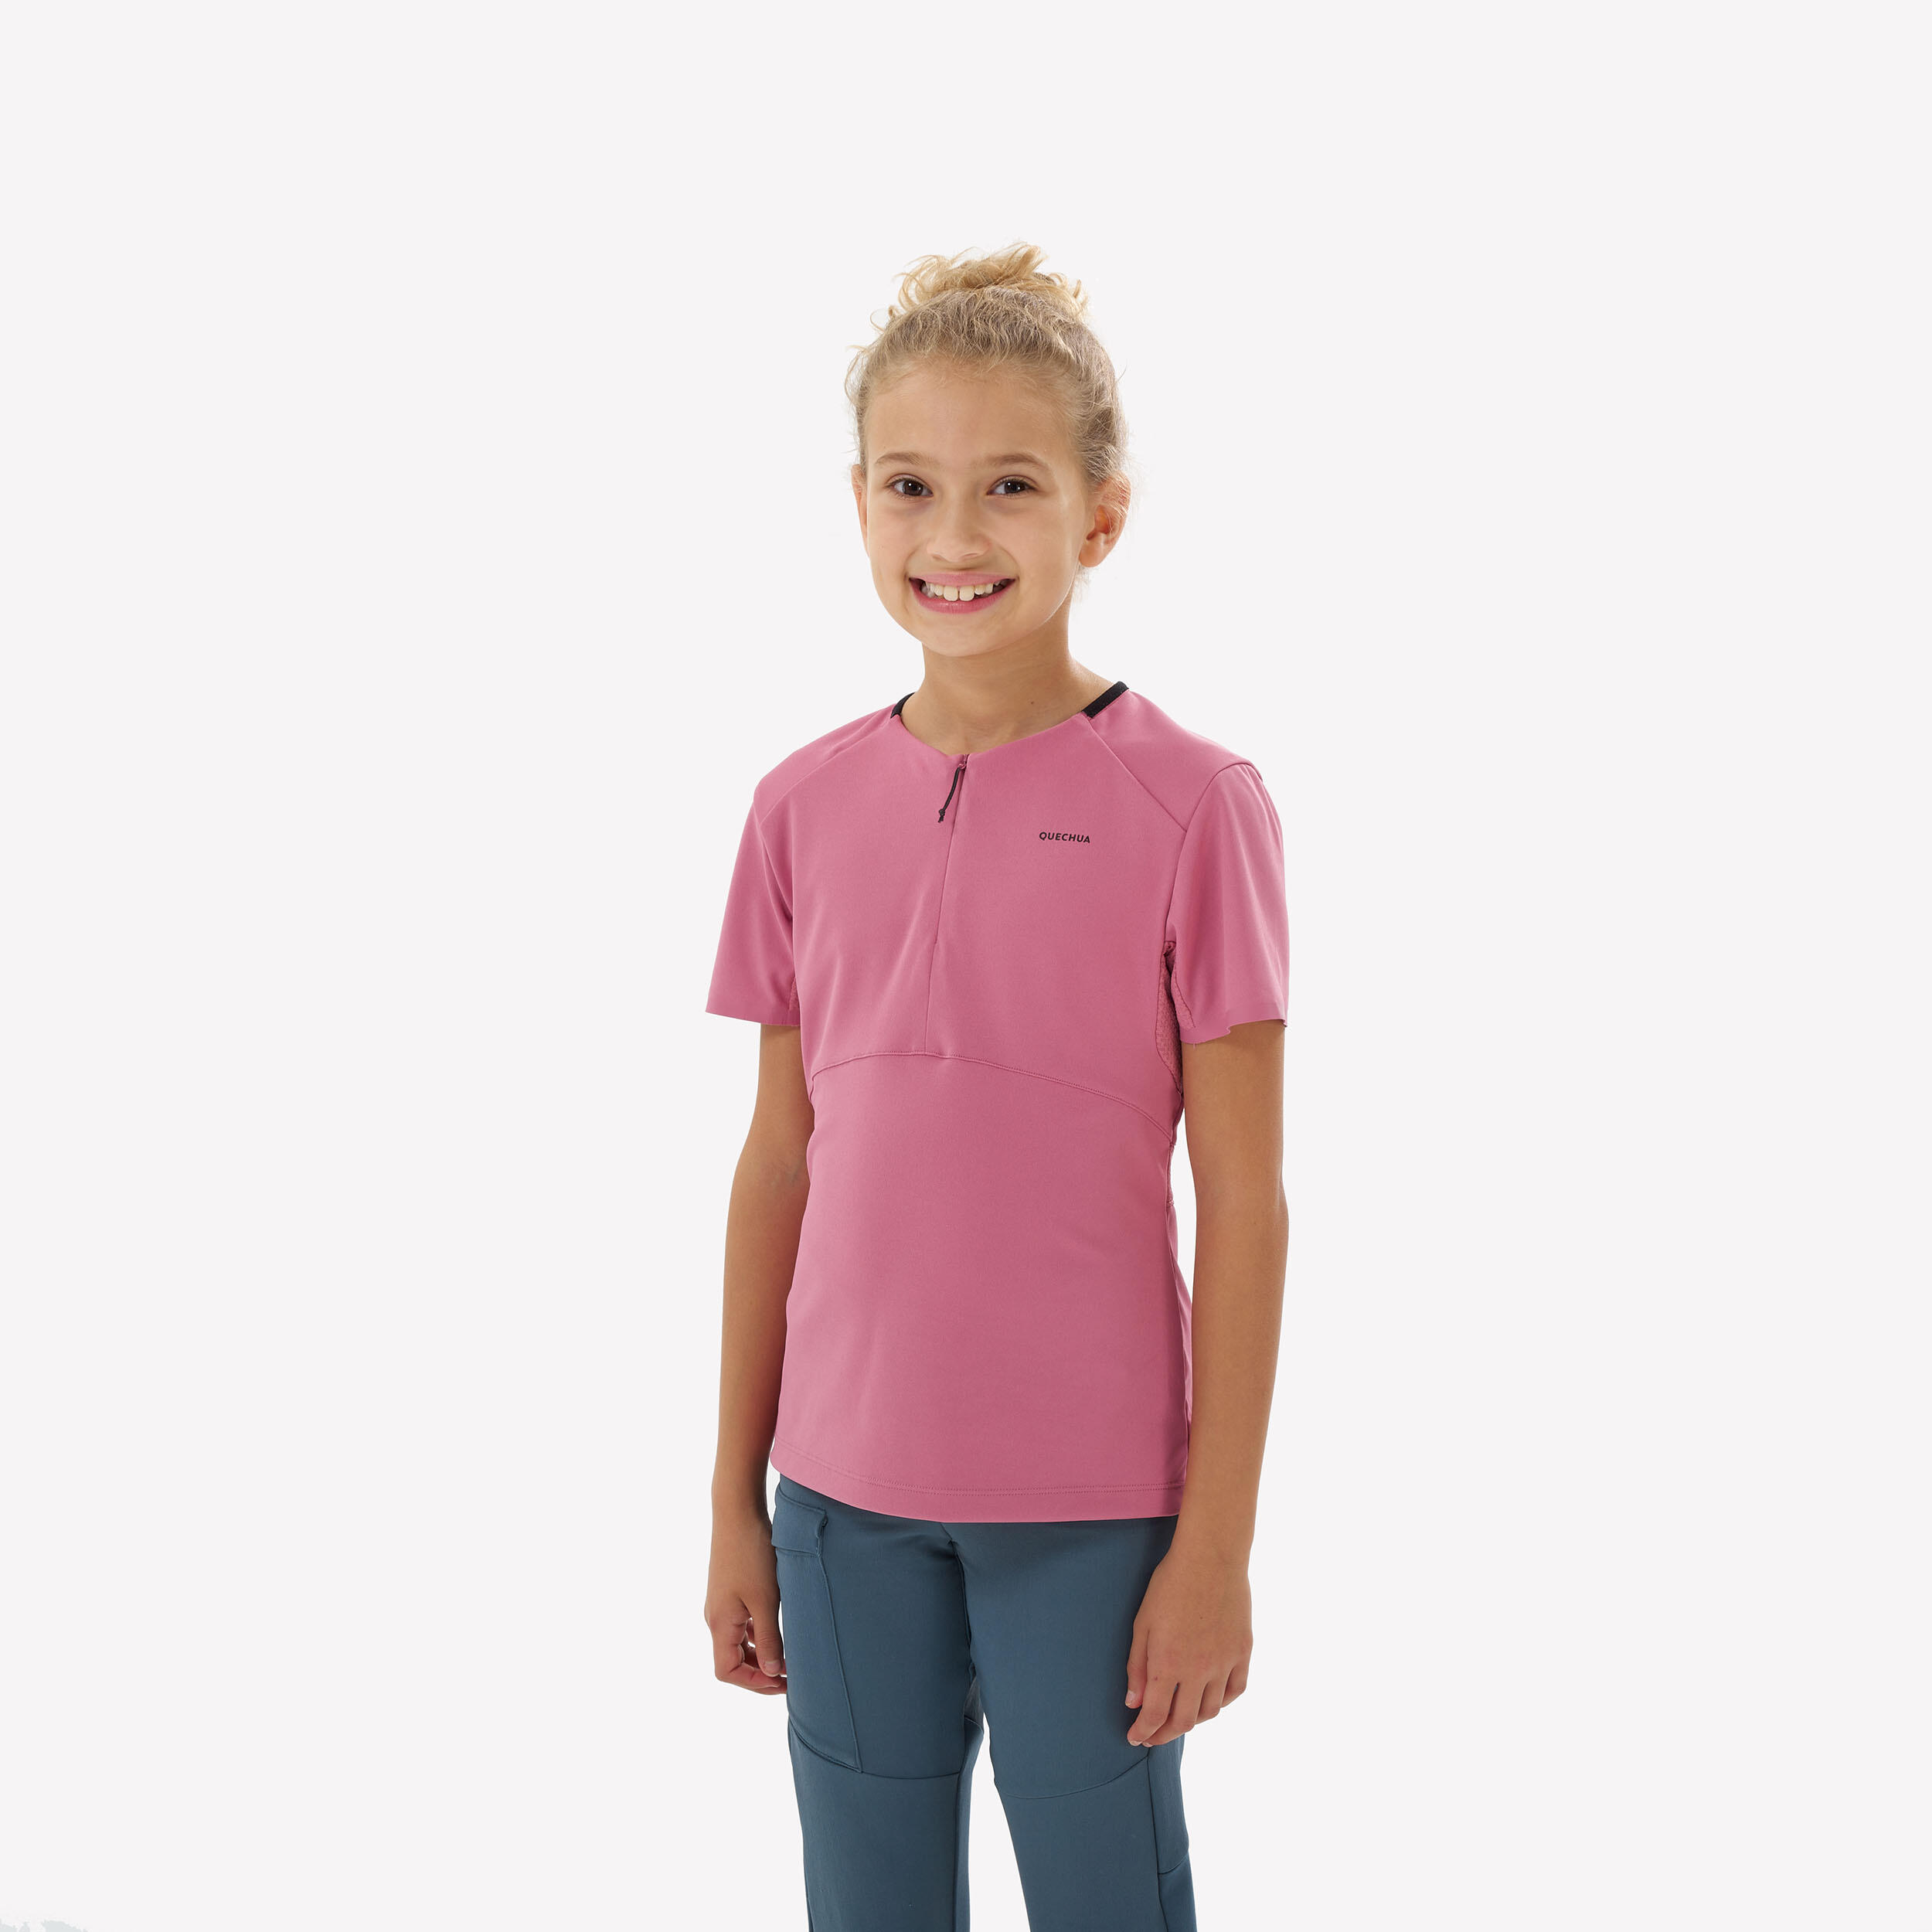 Kids’ Hiking T-Shirt - MH550 Ages 7-15 - Pink 1/7